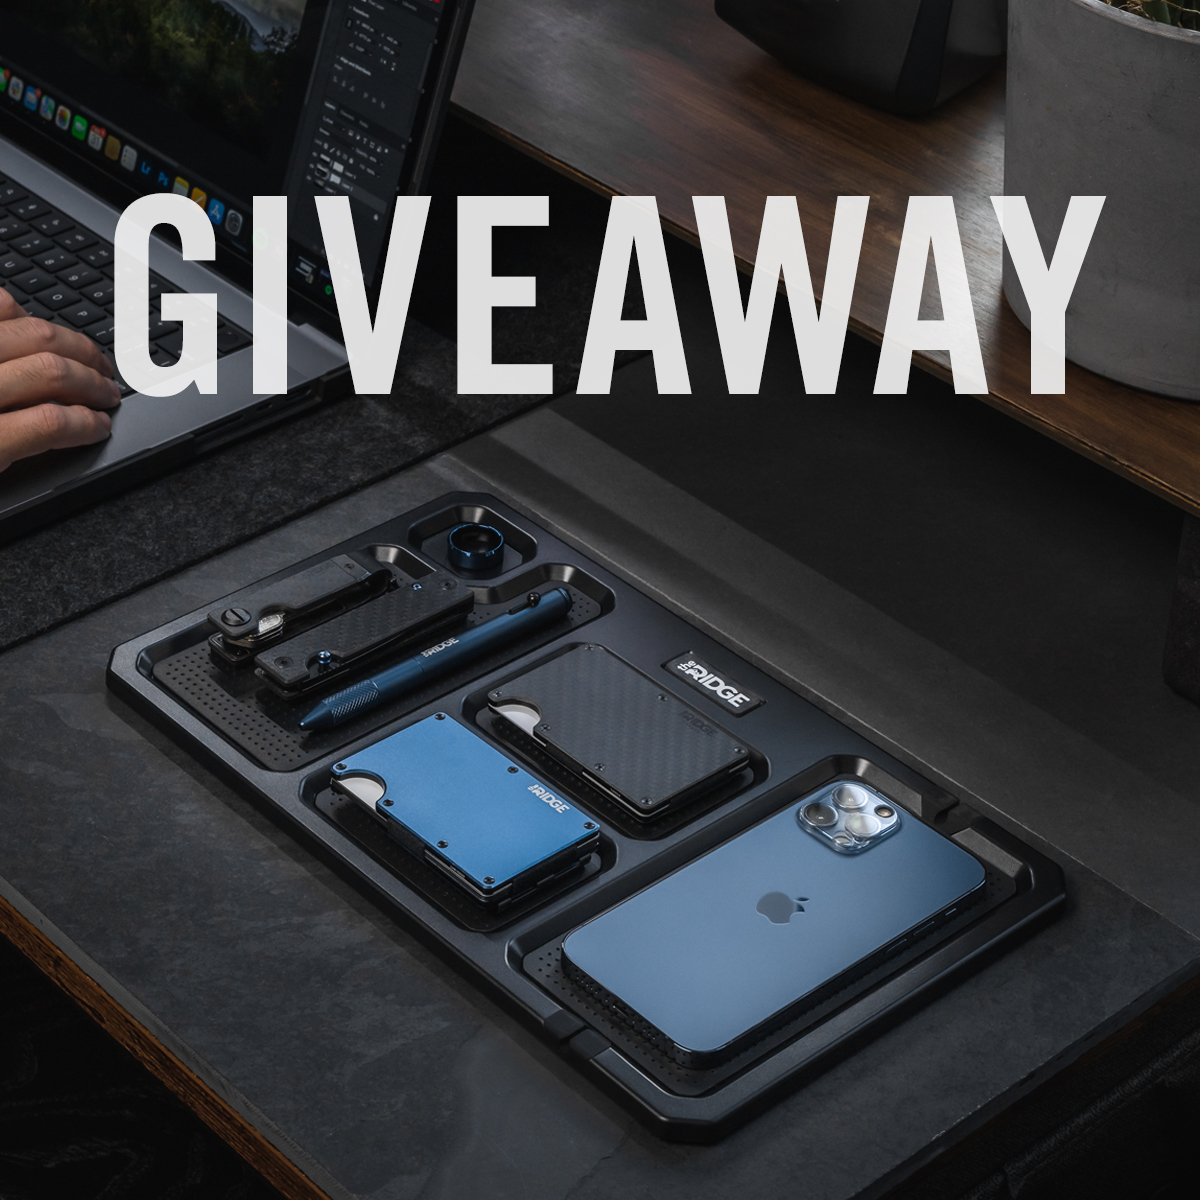 🎁 The Ultimate Everday Carry #GIVEAWAY 🎁 Want to win a Ridge Wallet, KeyCase, Bolt Action Pen, AND our brand new Valet Tray? Here’s how to enter 👇 Make sure you are following us ✅ Retweet this tweet ✅ 🗓That’s it! The winner will be selected on 9/23. Good luck!